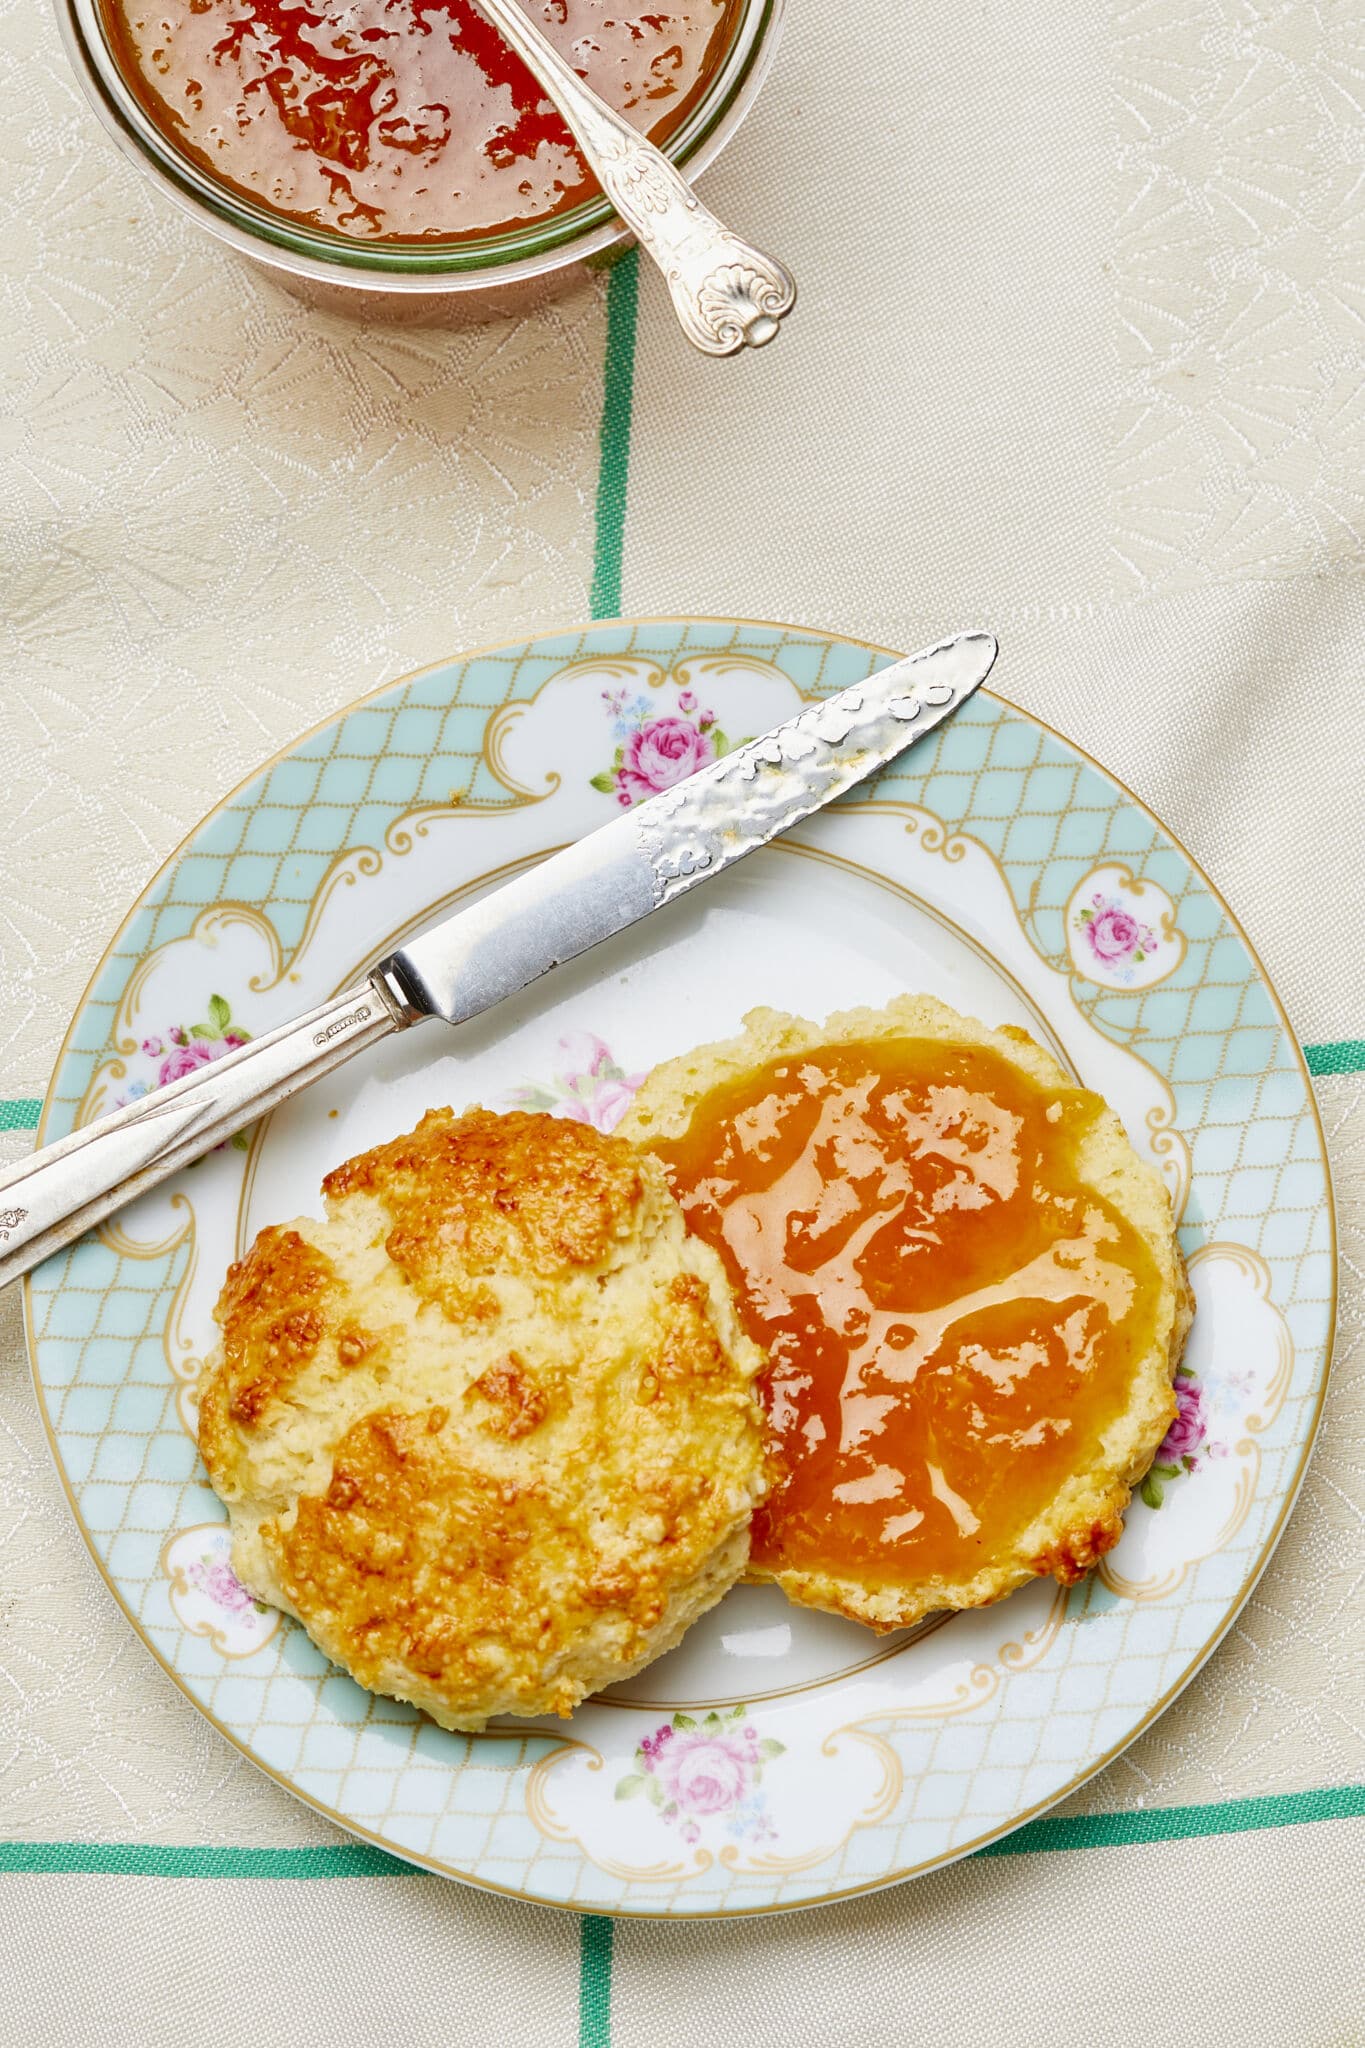 A scone with golden crust is cut in half, the bottom piece is smeared with velvety jam in bright orange color. A jar of Peach Whiskey jam is served on the side with a spoon. 